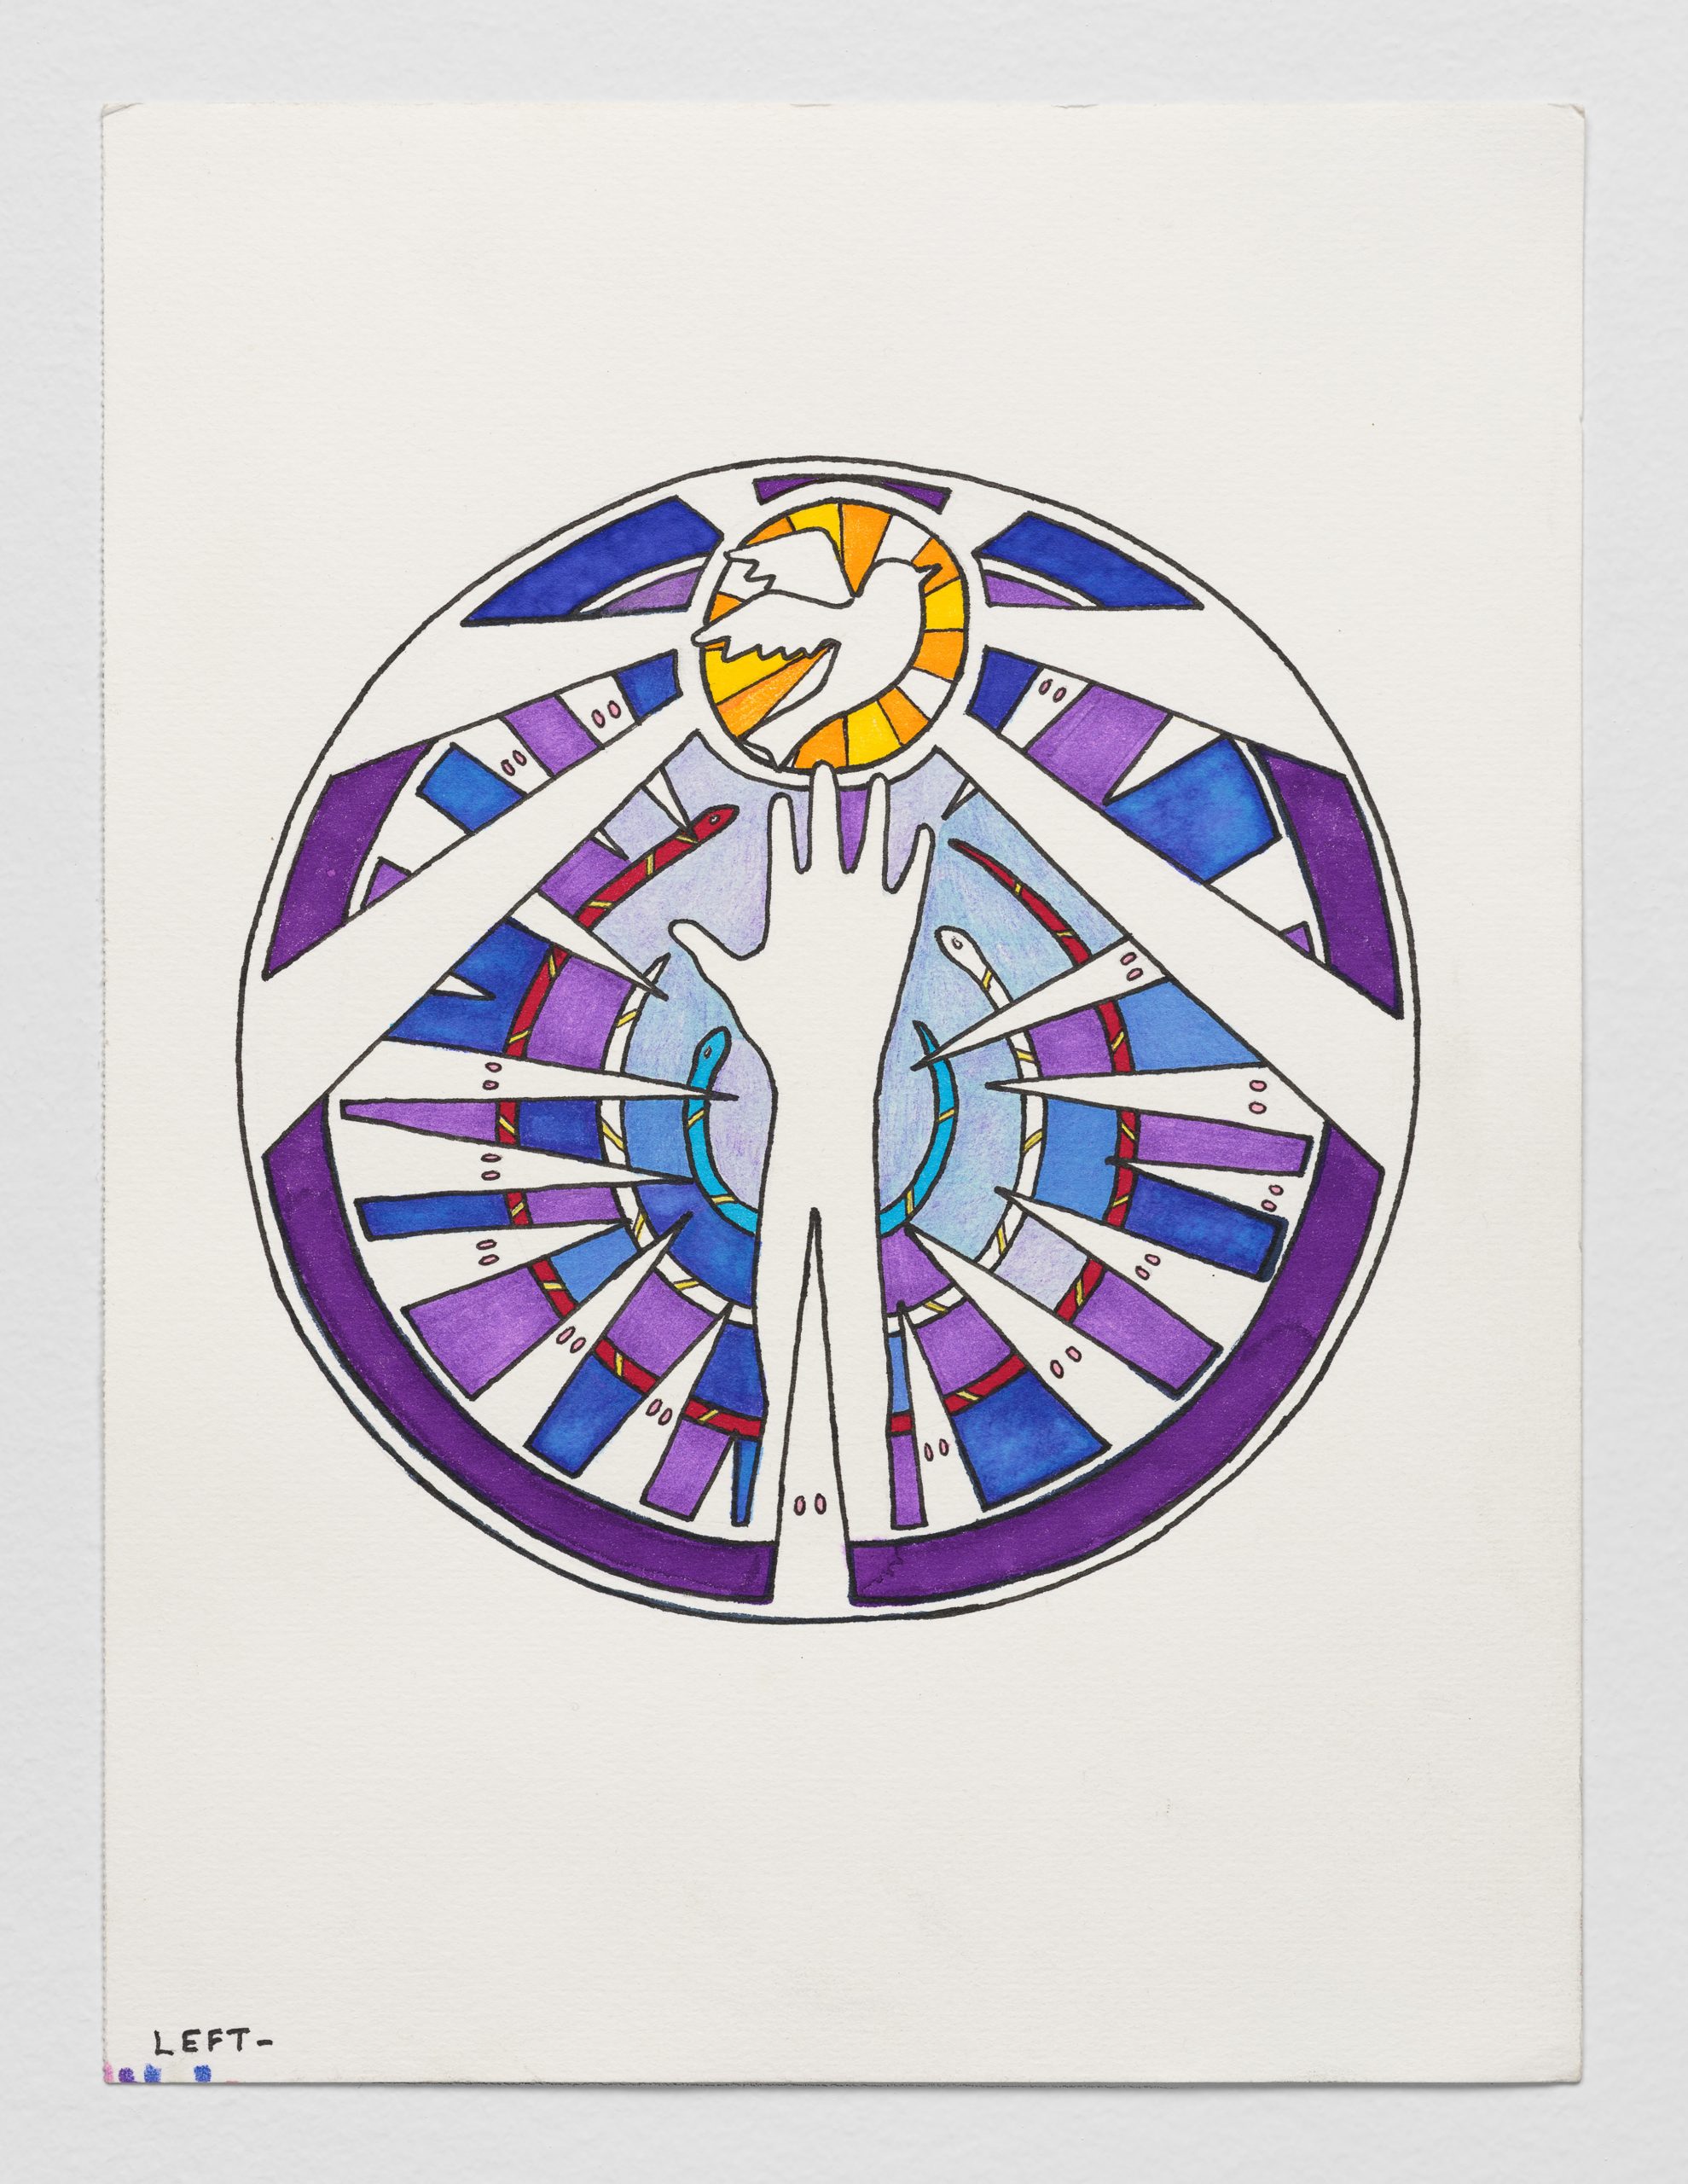 A dove in a yellow circle at the top of a series of circular designs with a hand reaching up through the center in ink on white paper.